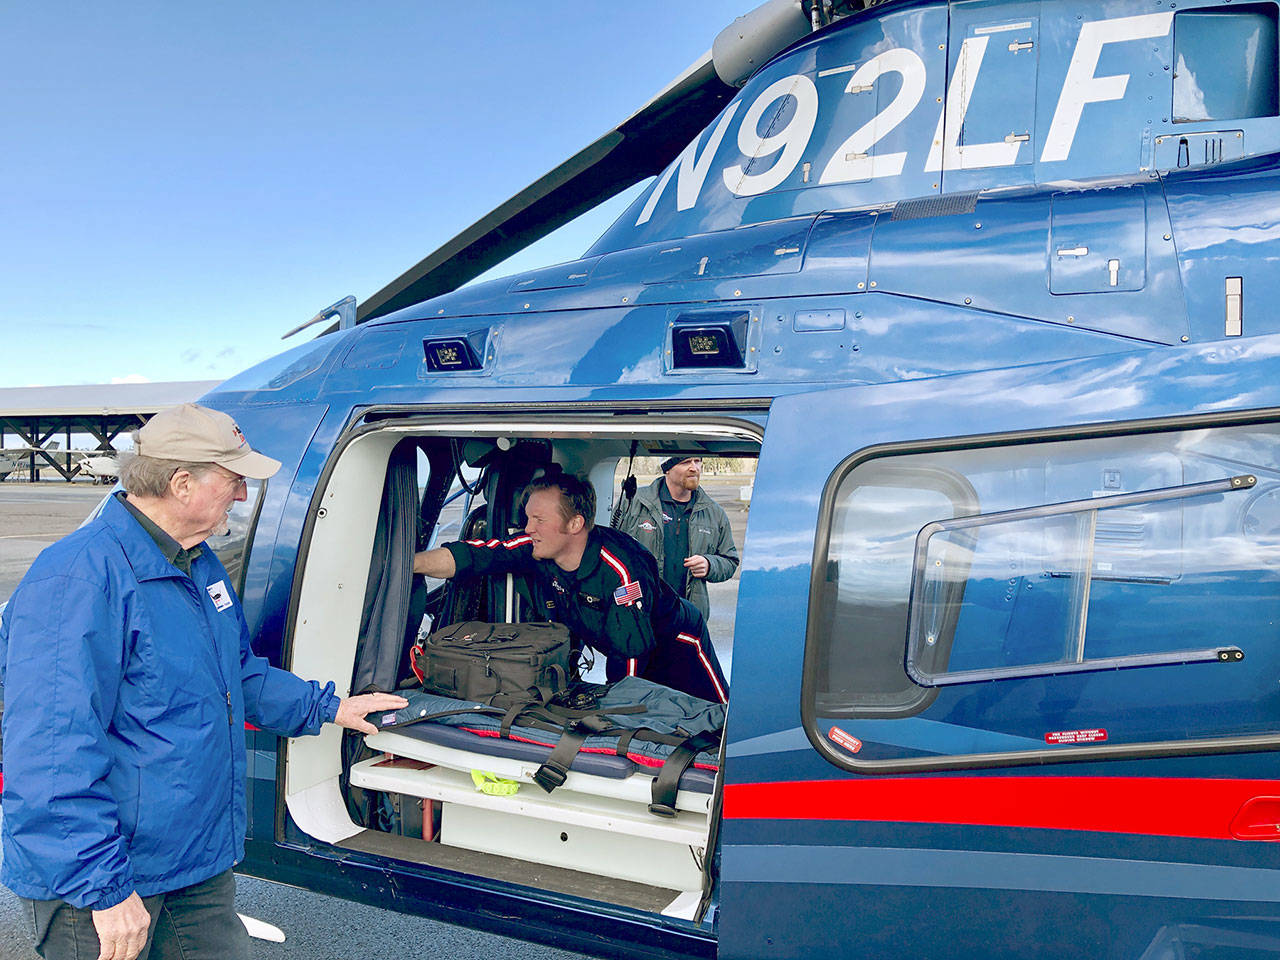 Alan Barnard, Port Angeles Disaster Air Response Team coordinator, looks on as Life Flight crew member/paramedic Nick Lane prepares the company’s helicopter to assist with emergency response efforts at the scene of the logging helicopter crash.